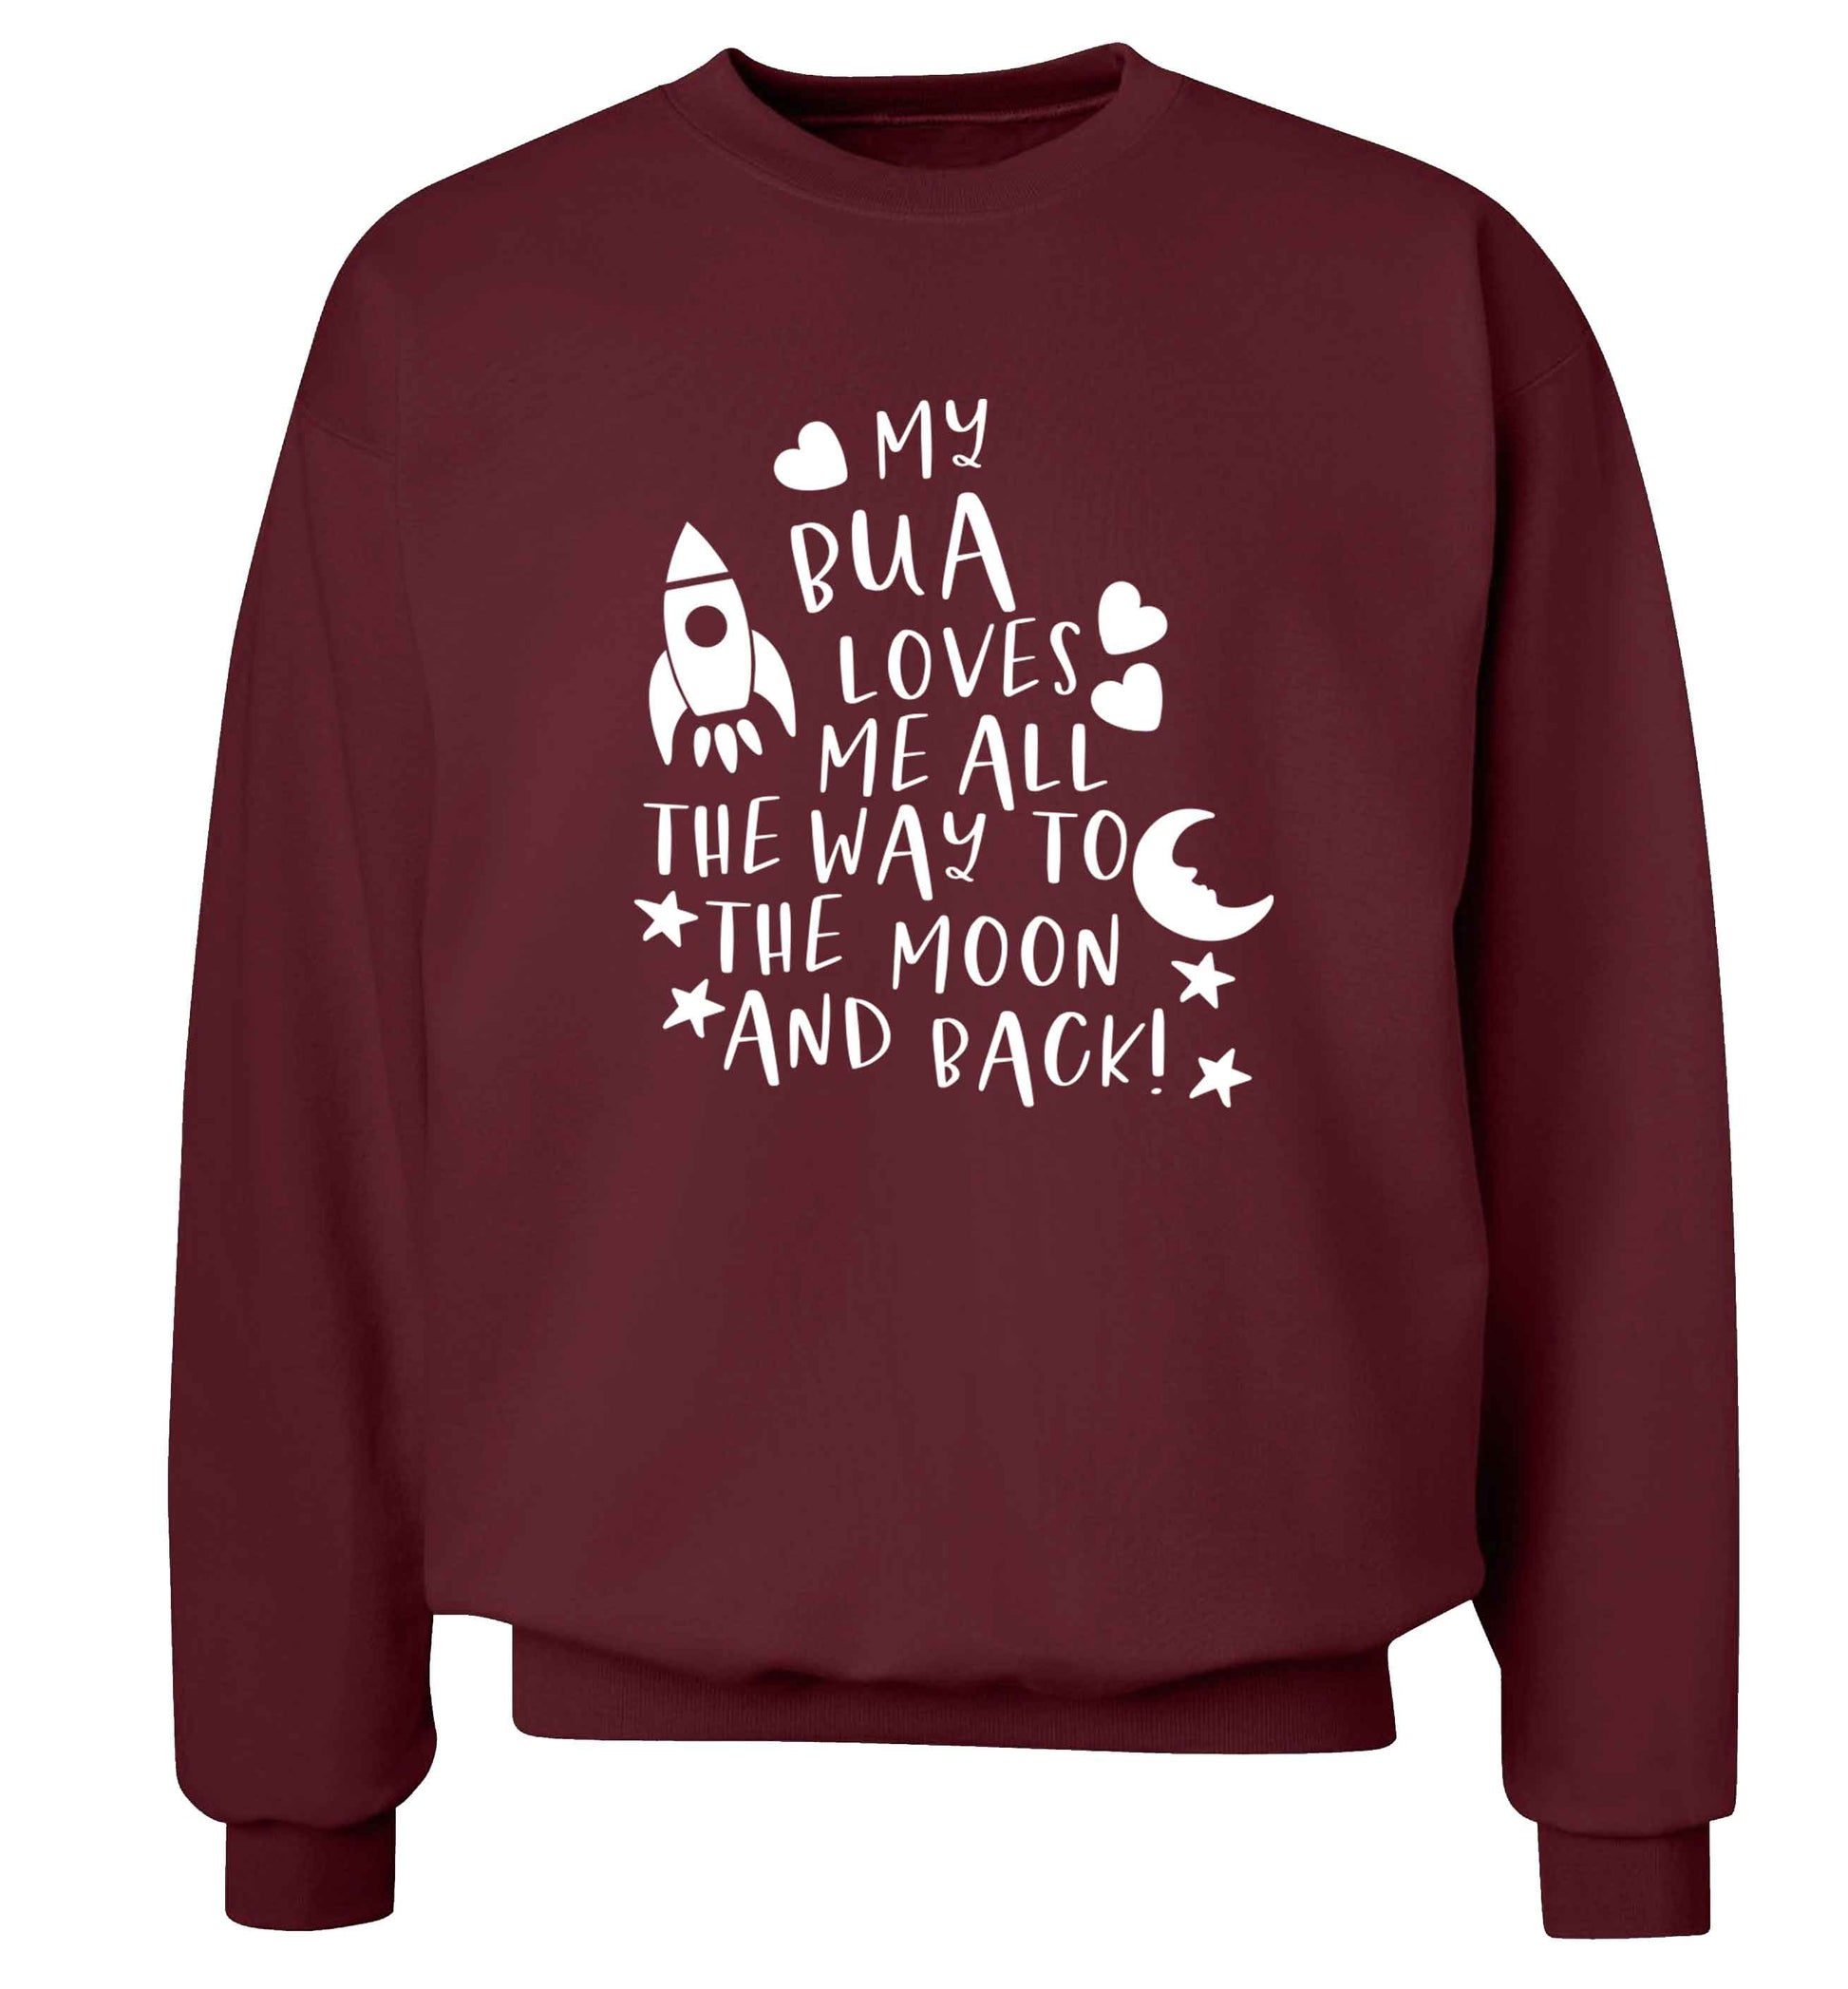 My bua loves me all they way to the moon and back Adult's unisex maroon Sweater 2XL